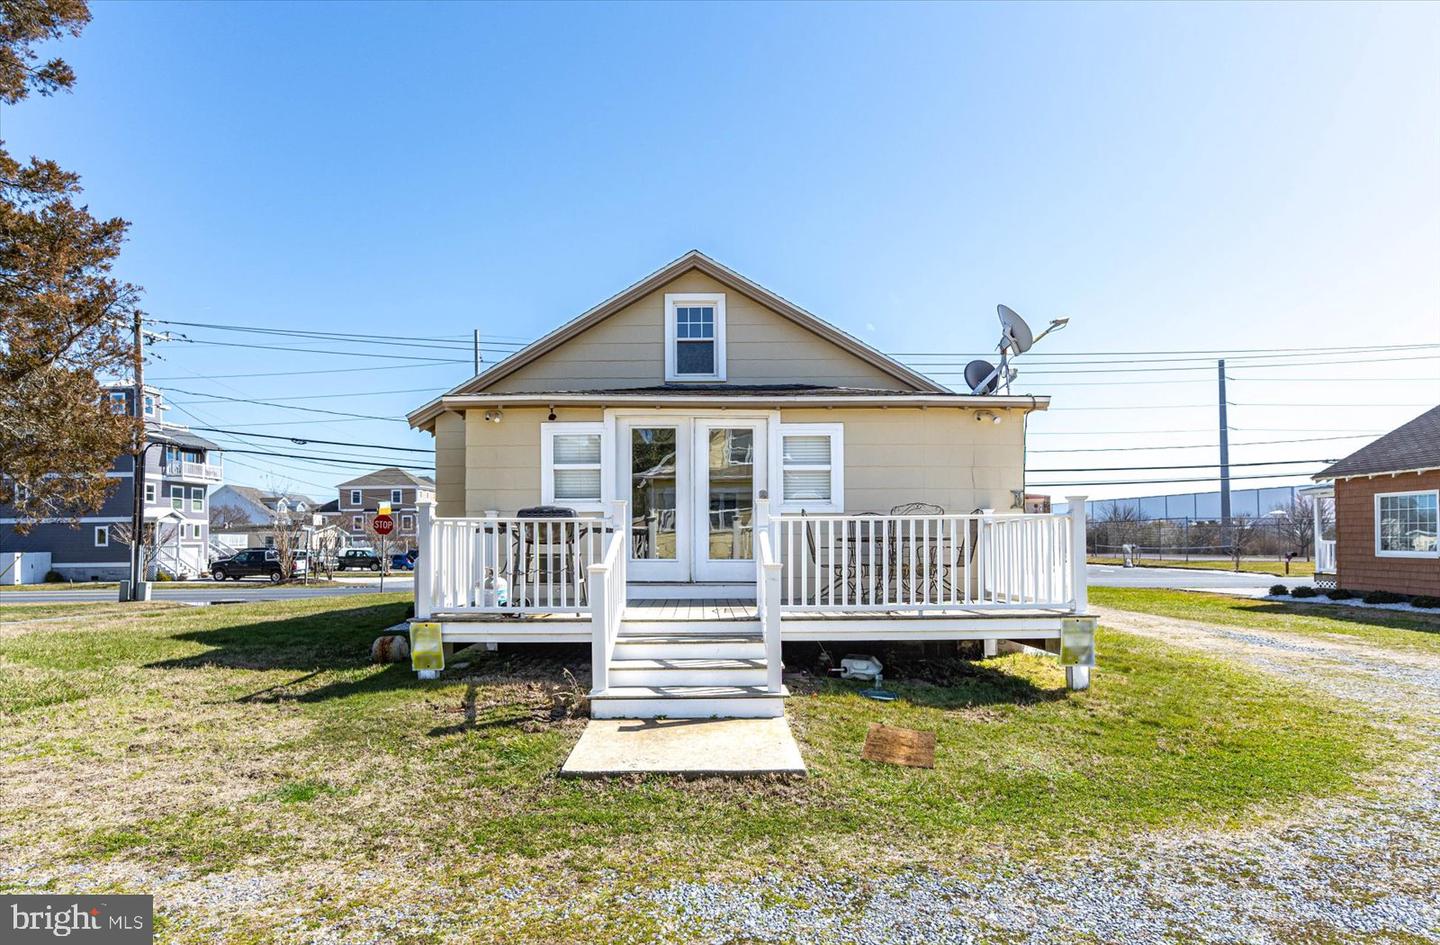 MDWO2019446-802902744740-2024-03-07-00-08-06 9801 / 9805 Golf Course Rd | Ocean City, MD Real Estate For Sale | MLS# Mdwo2019446  - 1st Choice Properties